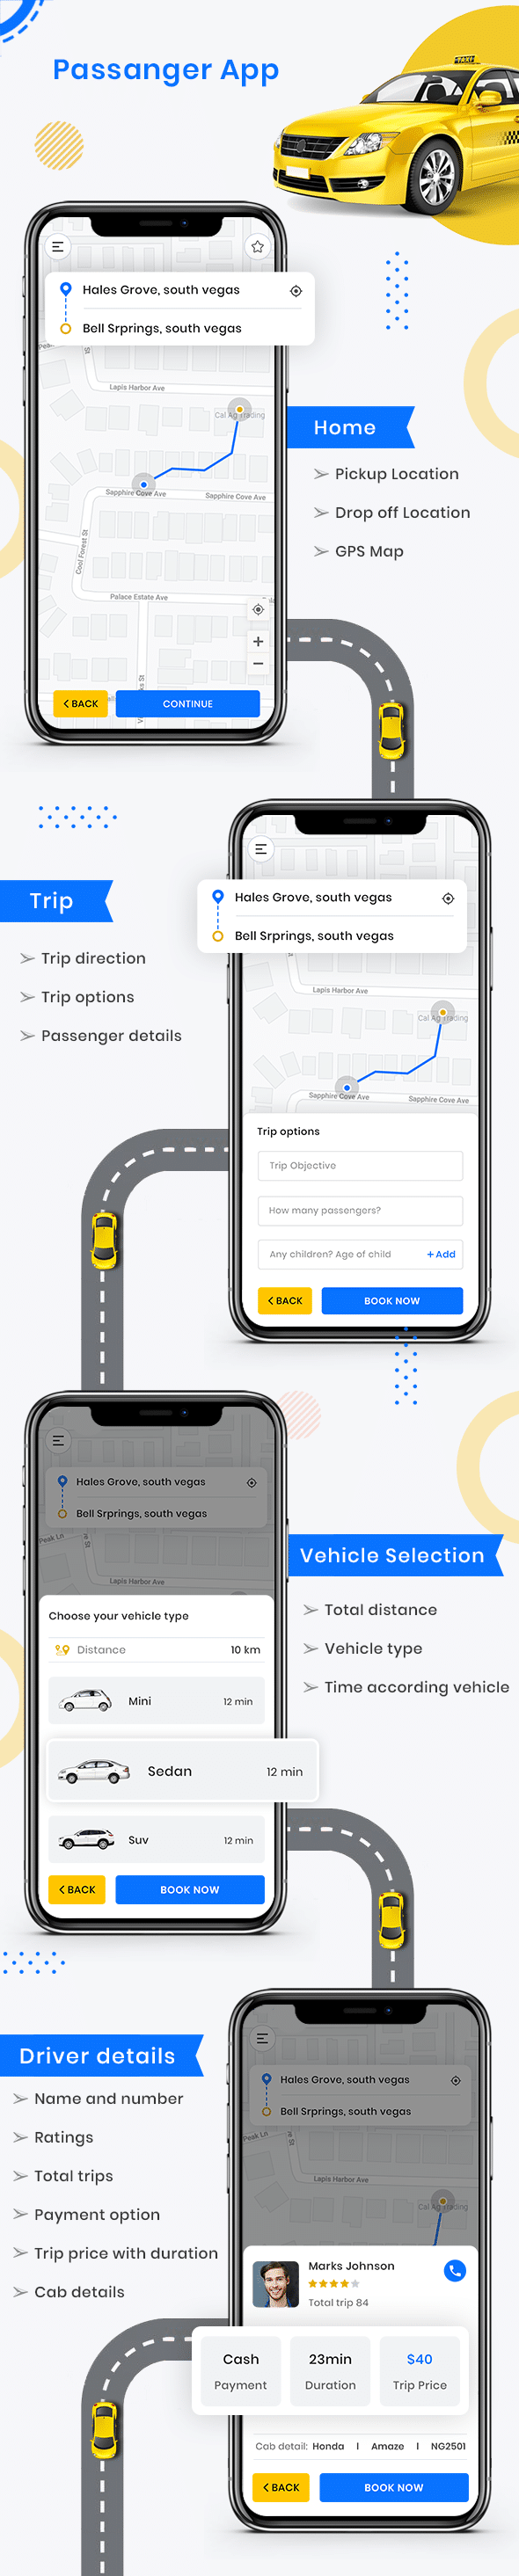 CabME - Flutter Complete Taxi app | Taxi Booking Solution - 6